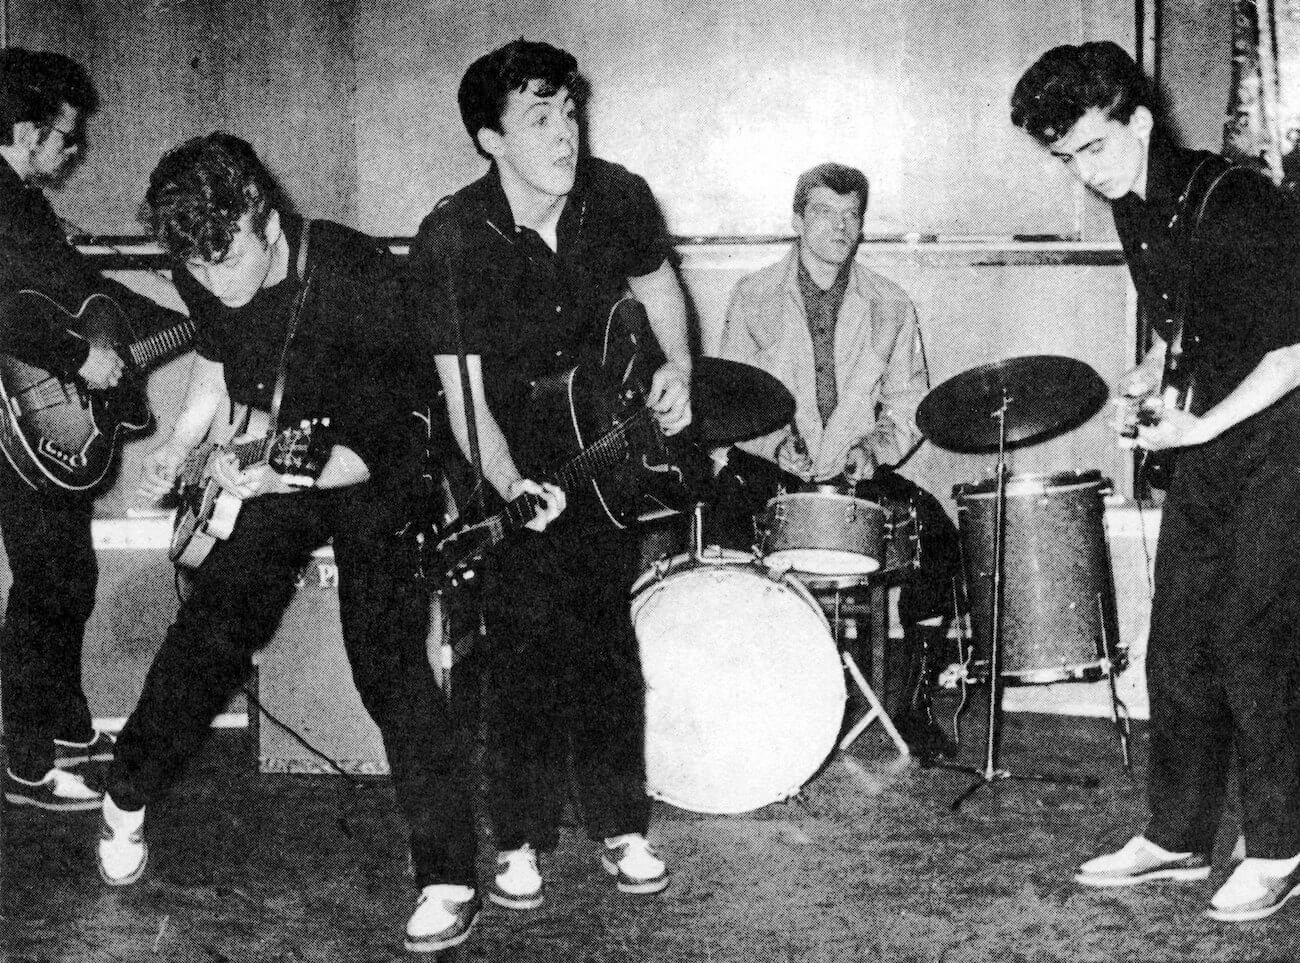 John Lennon and The Beatles performing around 1960.